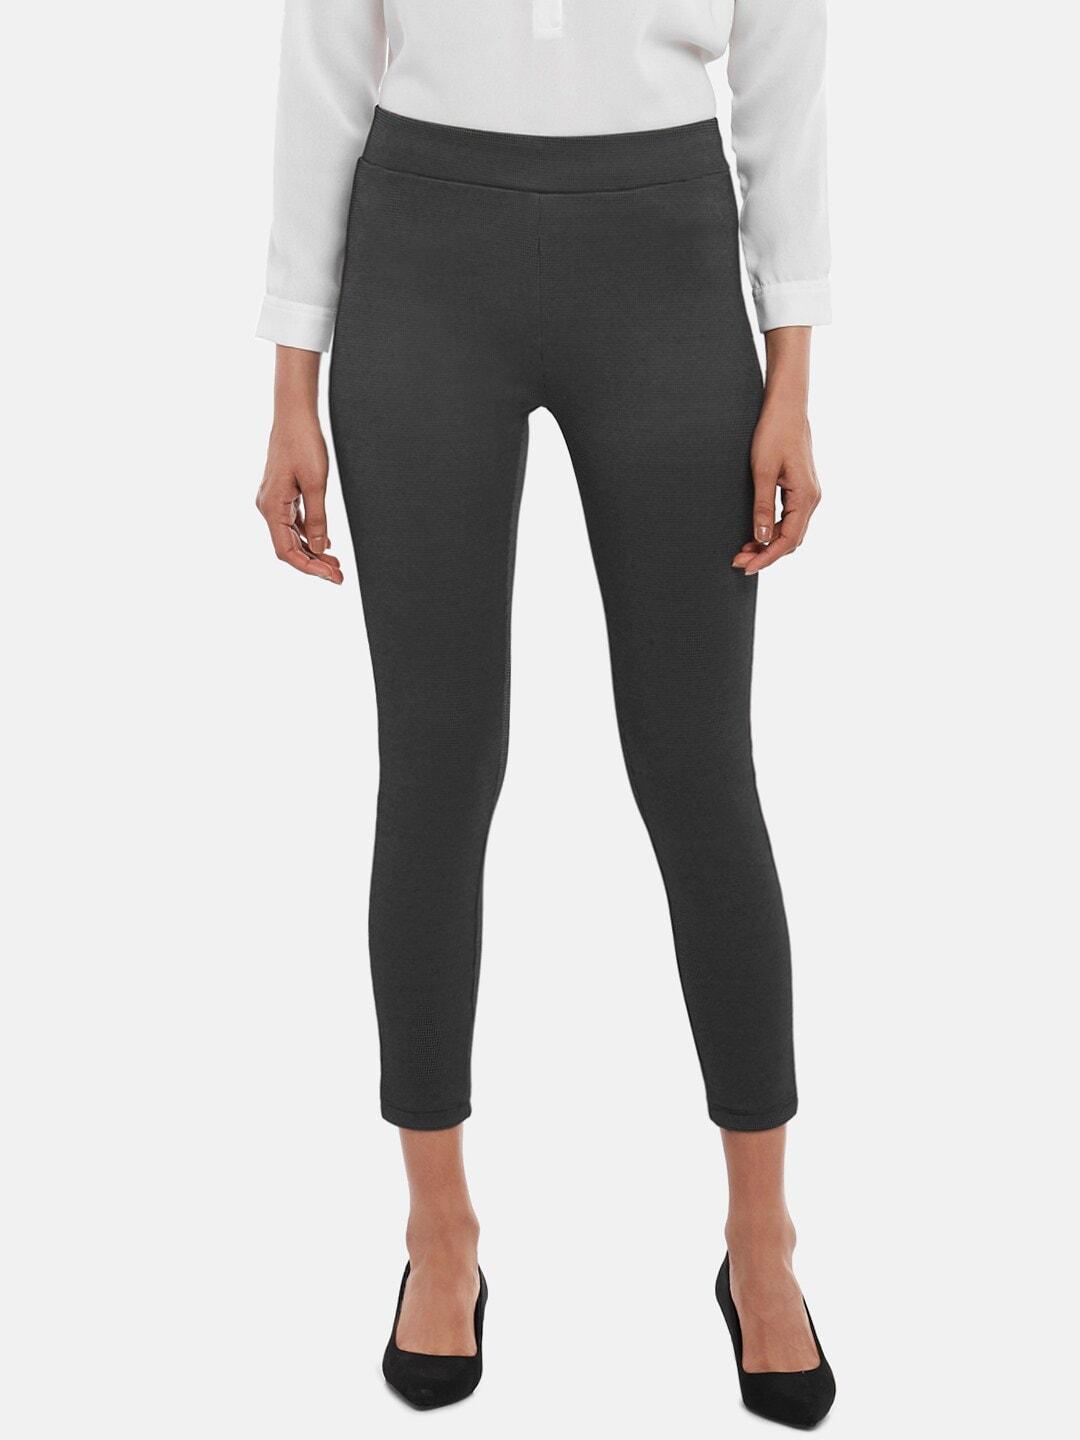 annabelle-by-pantaloons-women-charcoal-grey-checked-skinny-fit-treggings